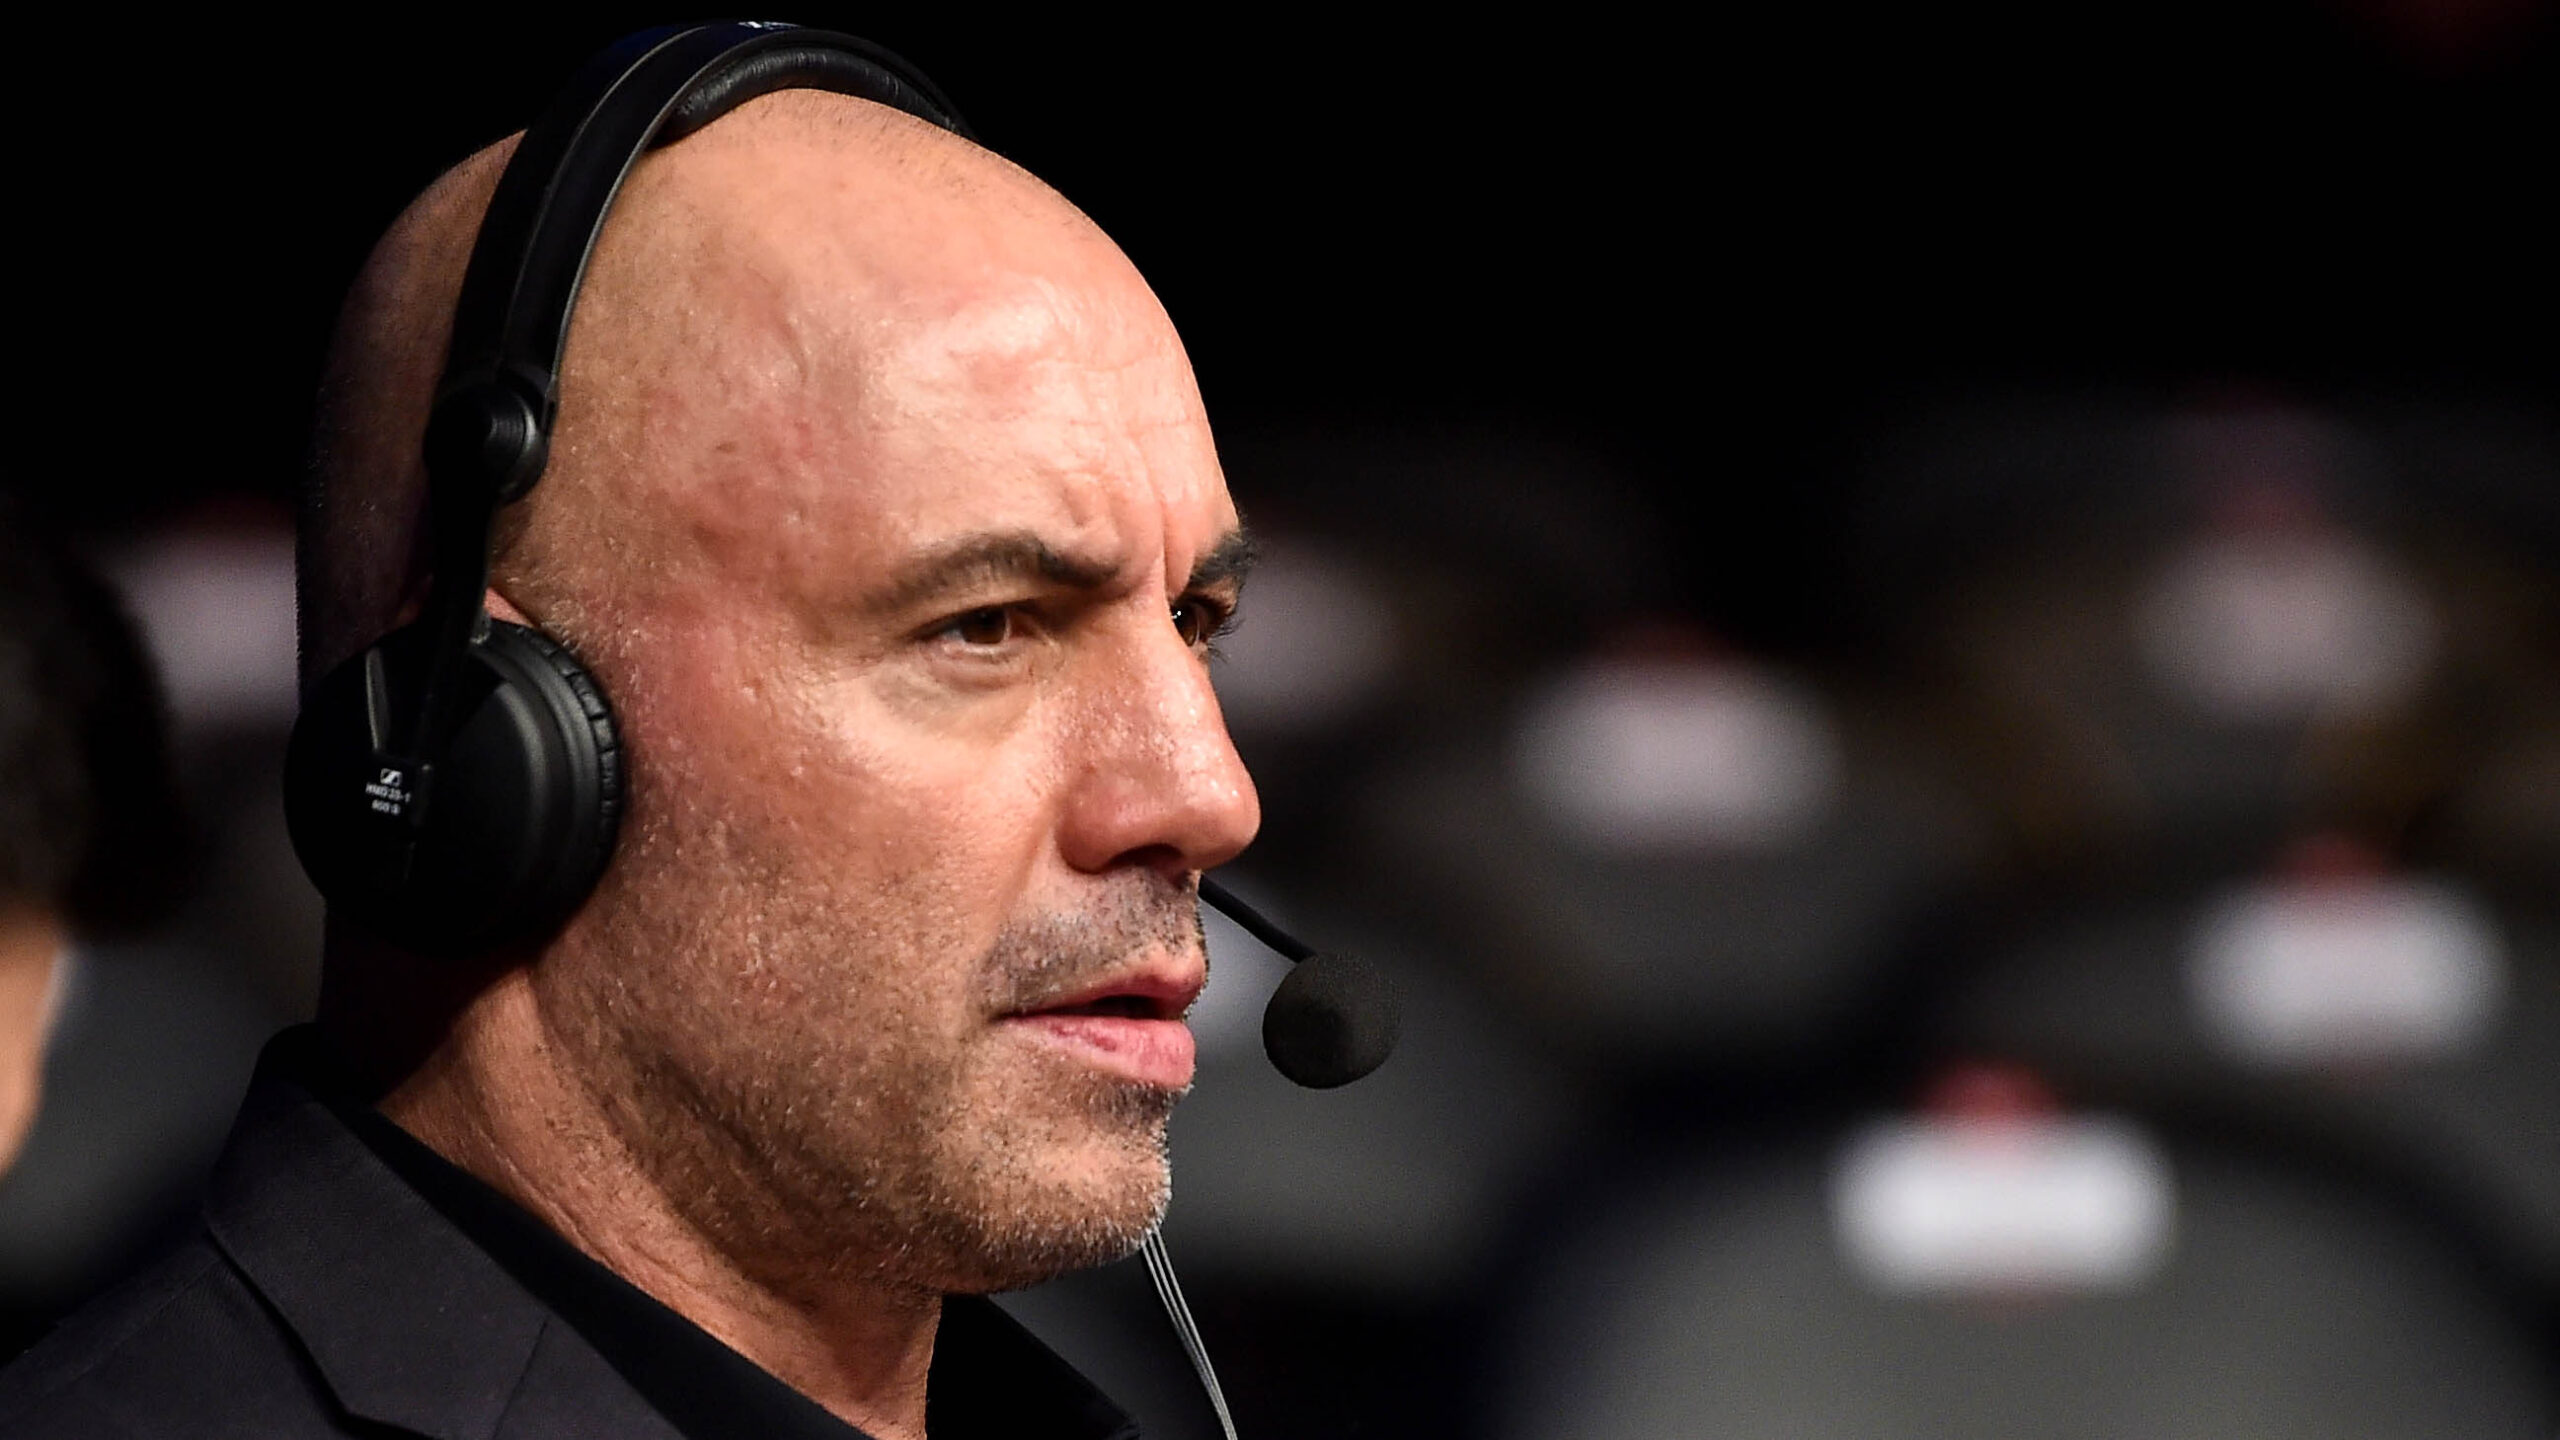 Joe Rogan Goes Off On CNN: ‘They Lost A F***load Of Credibility’